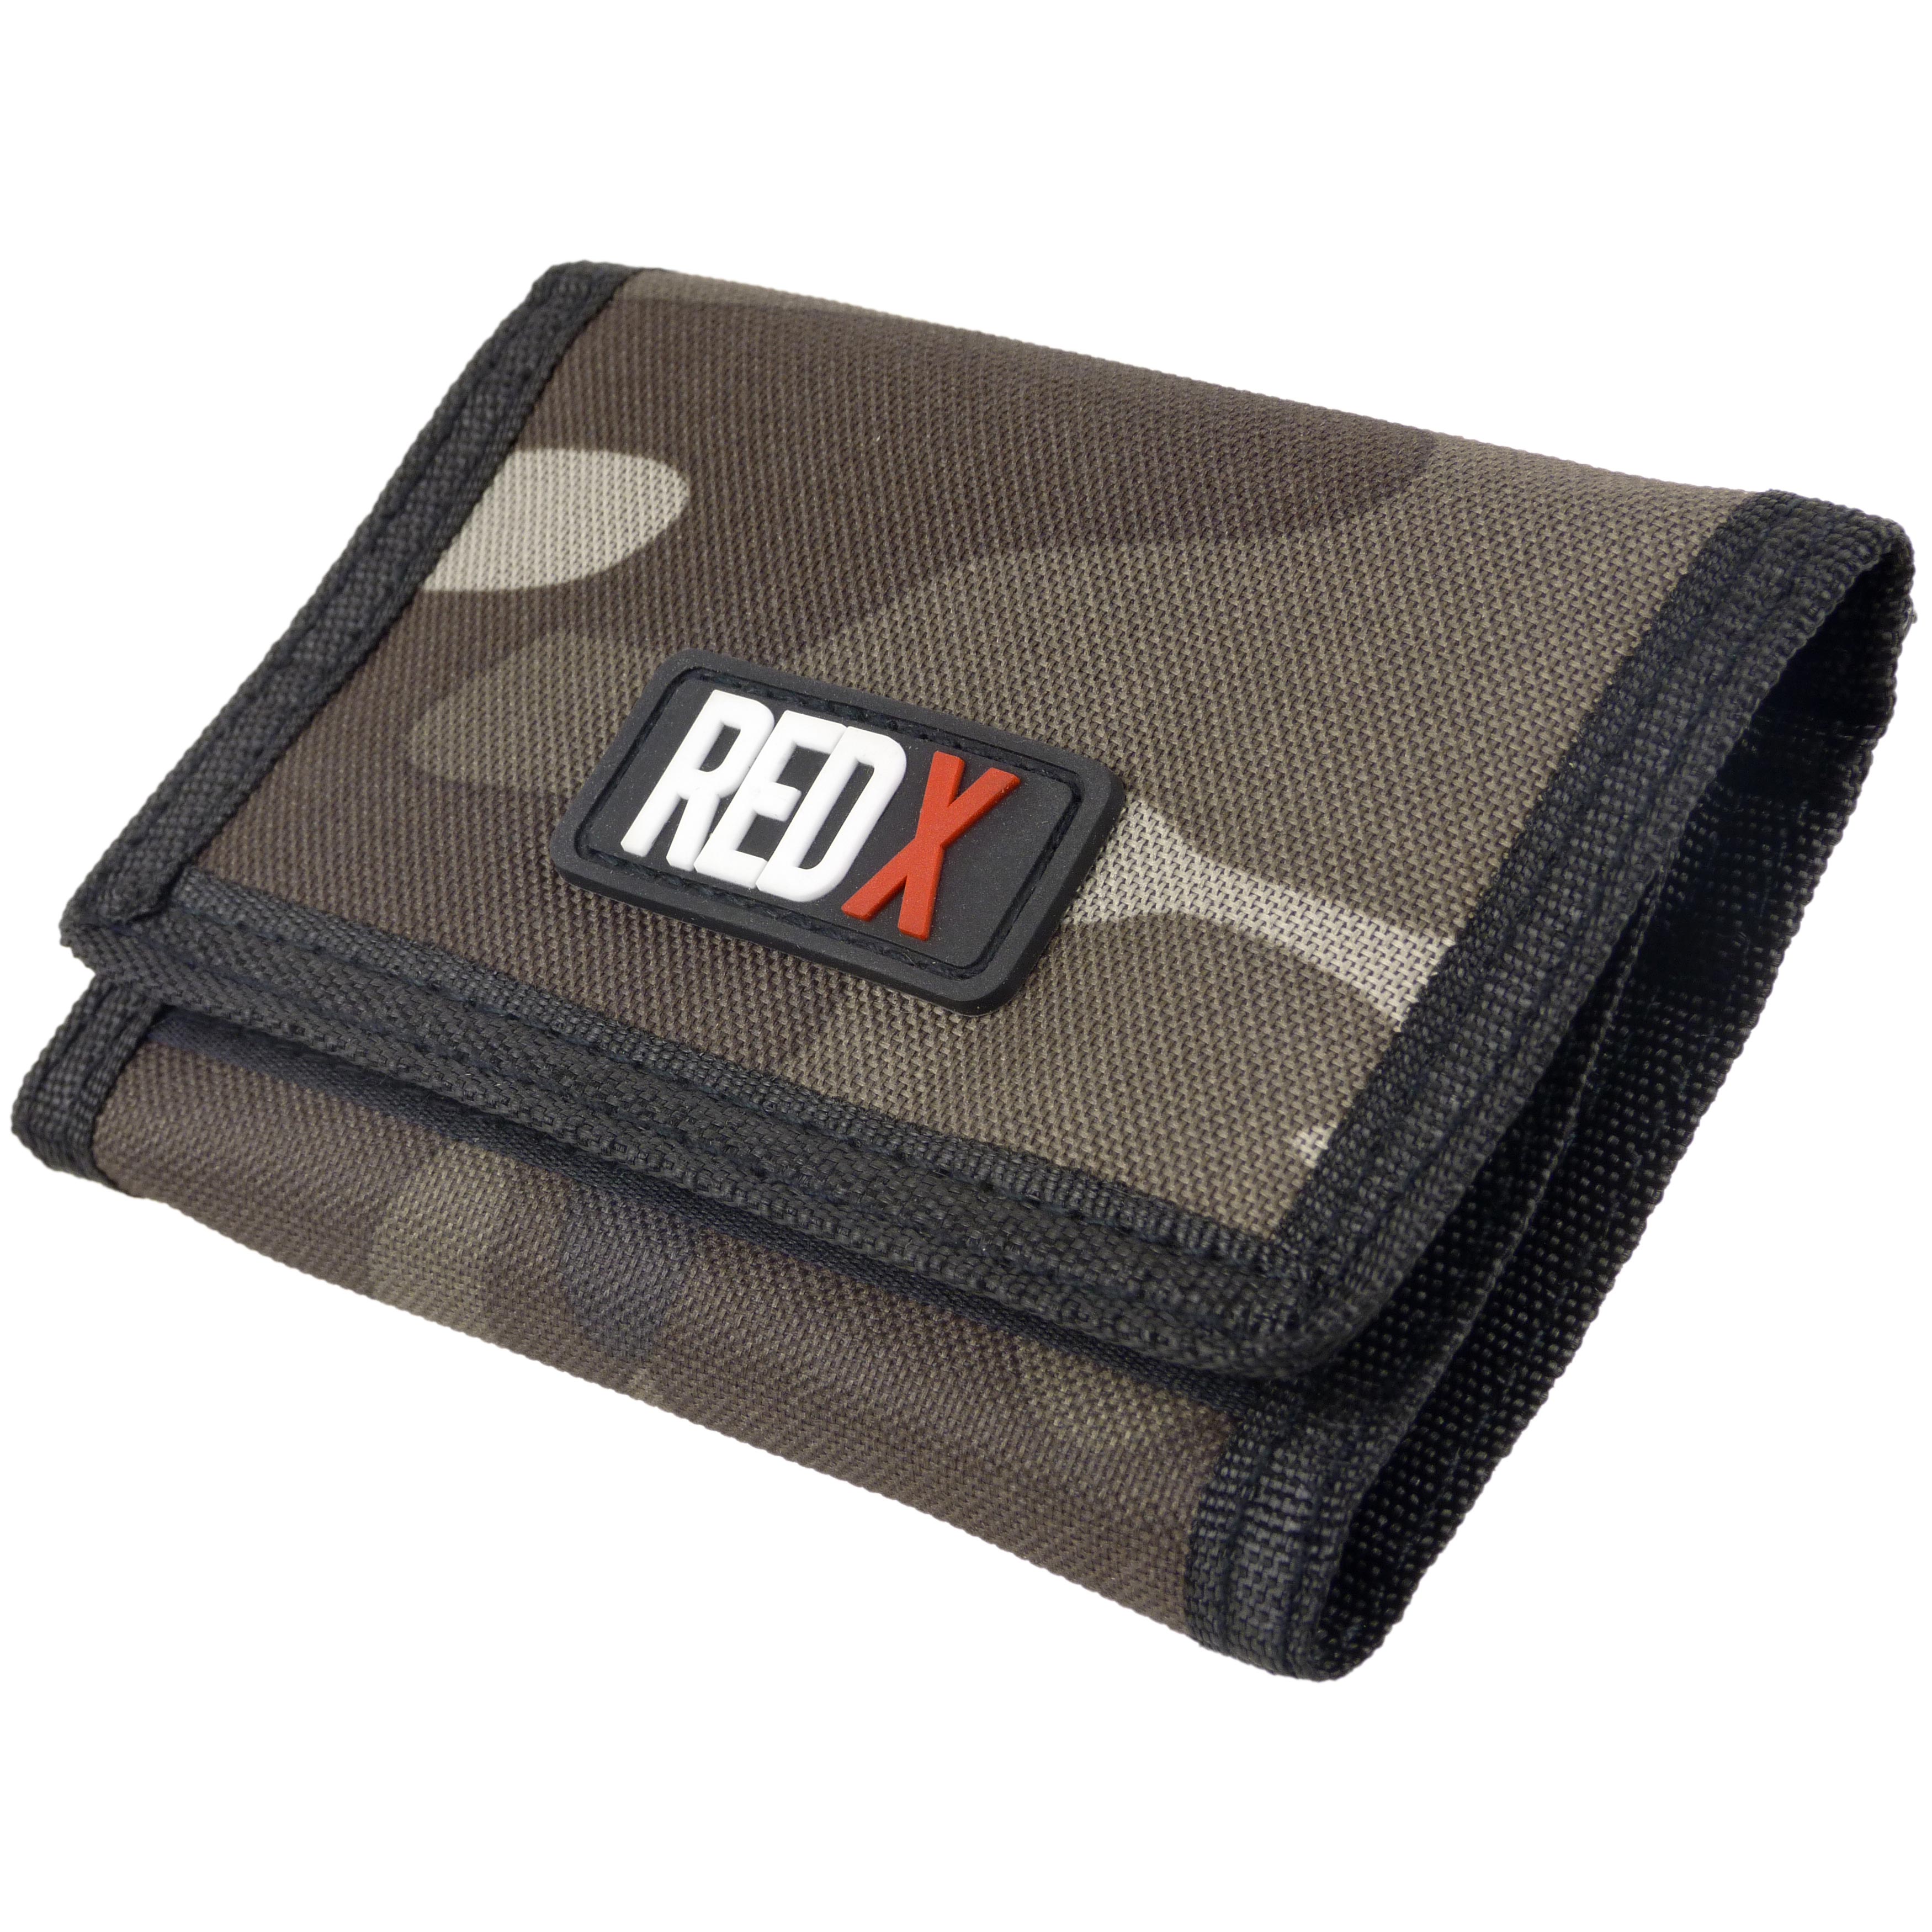 Mens Boys RED X Camo Camouflage TriFold Wallet Coin Purse Canvas Sports | eBay